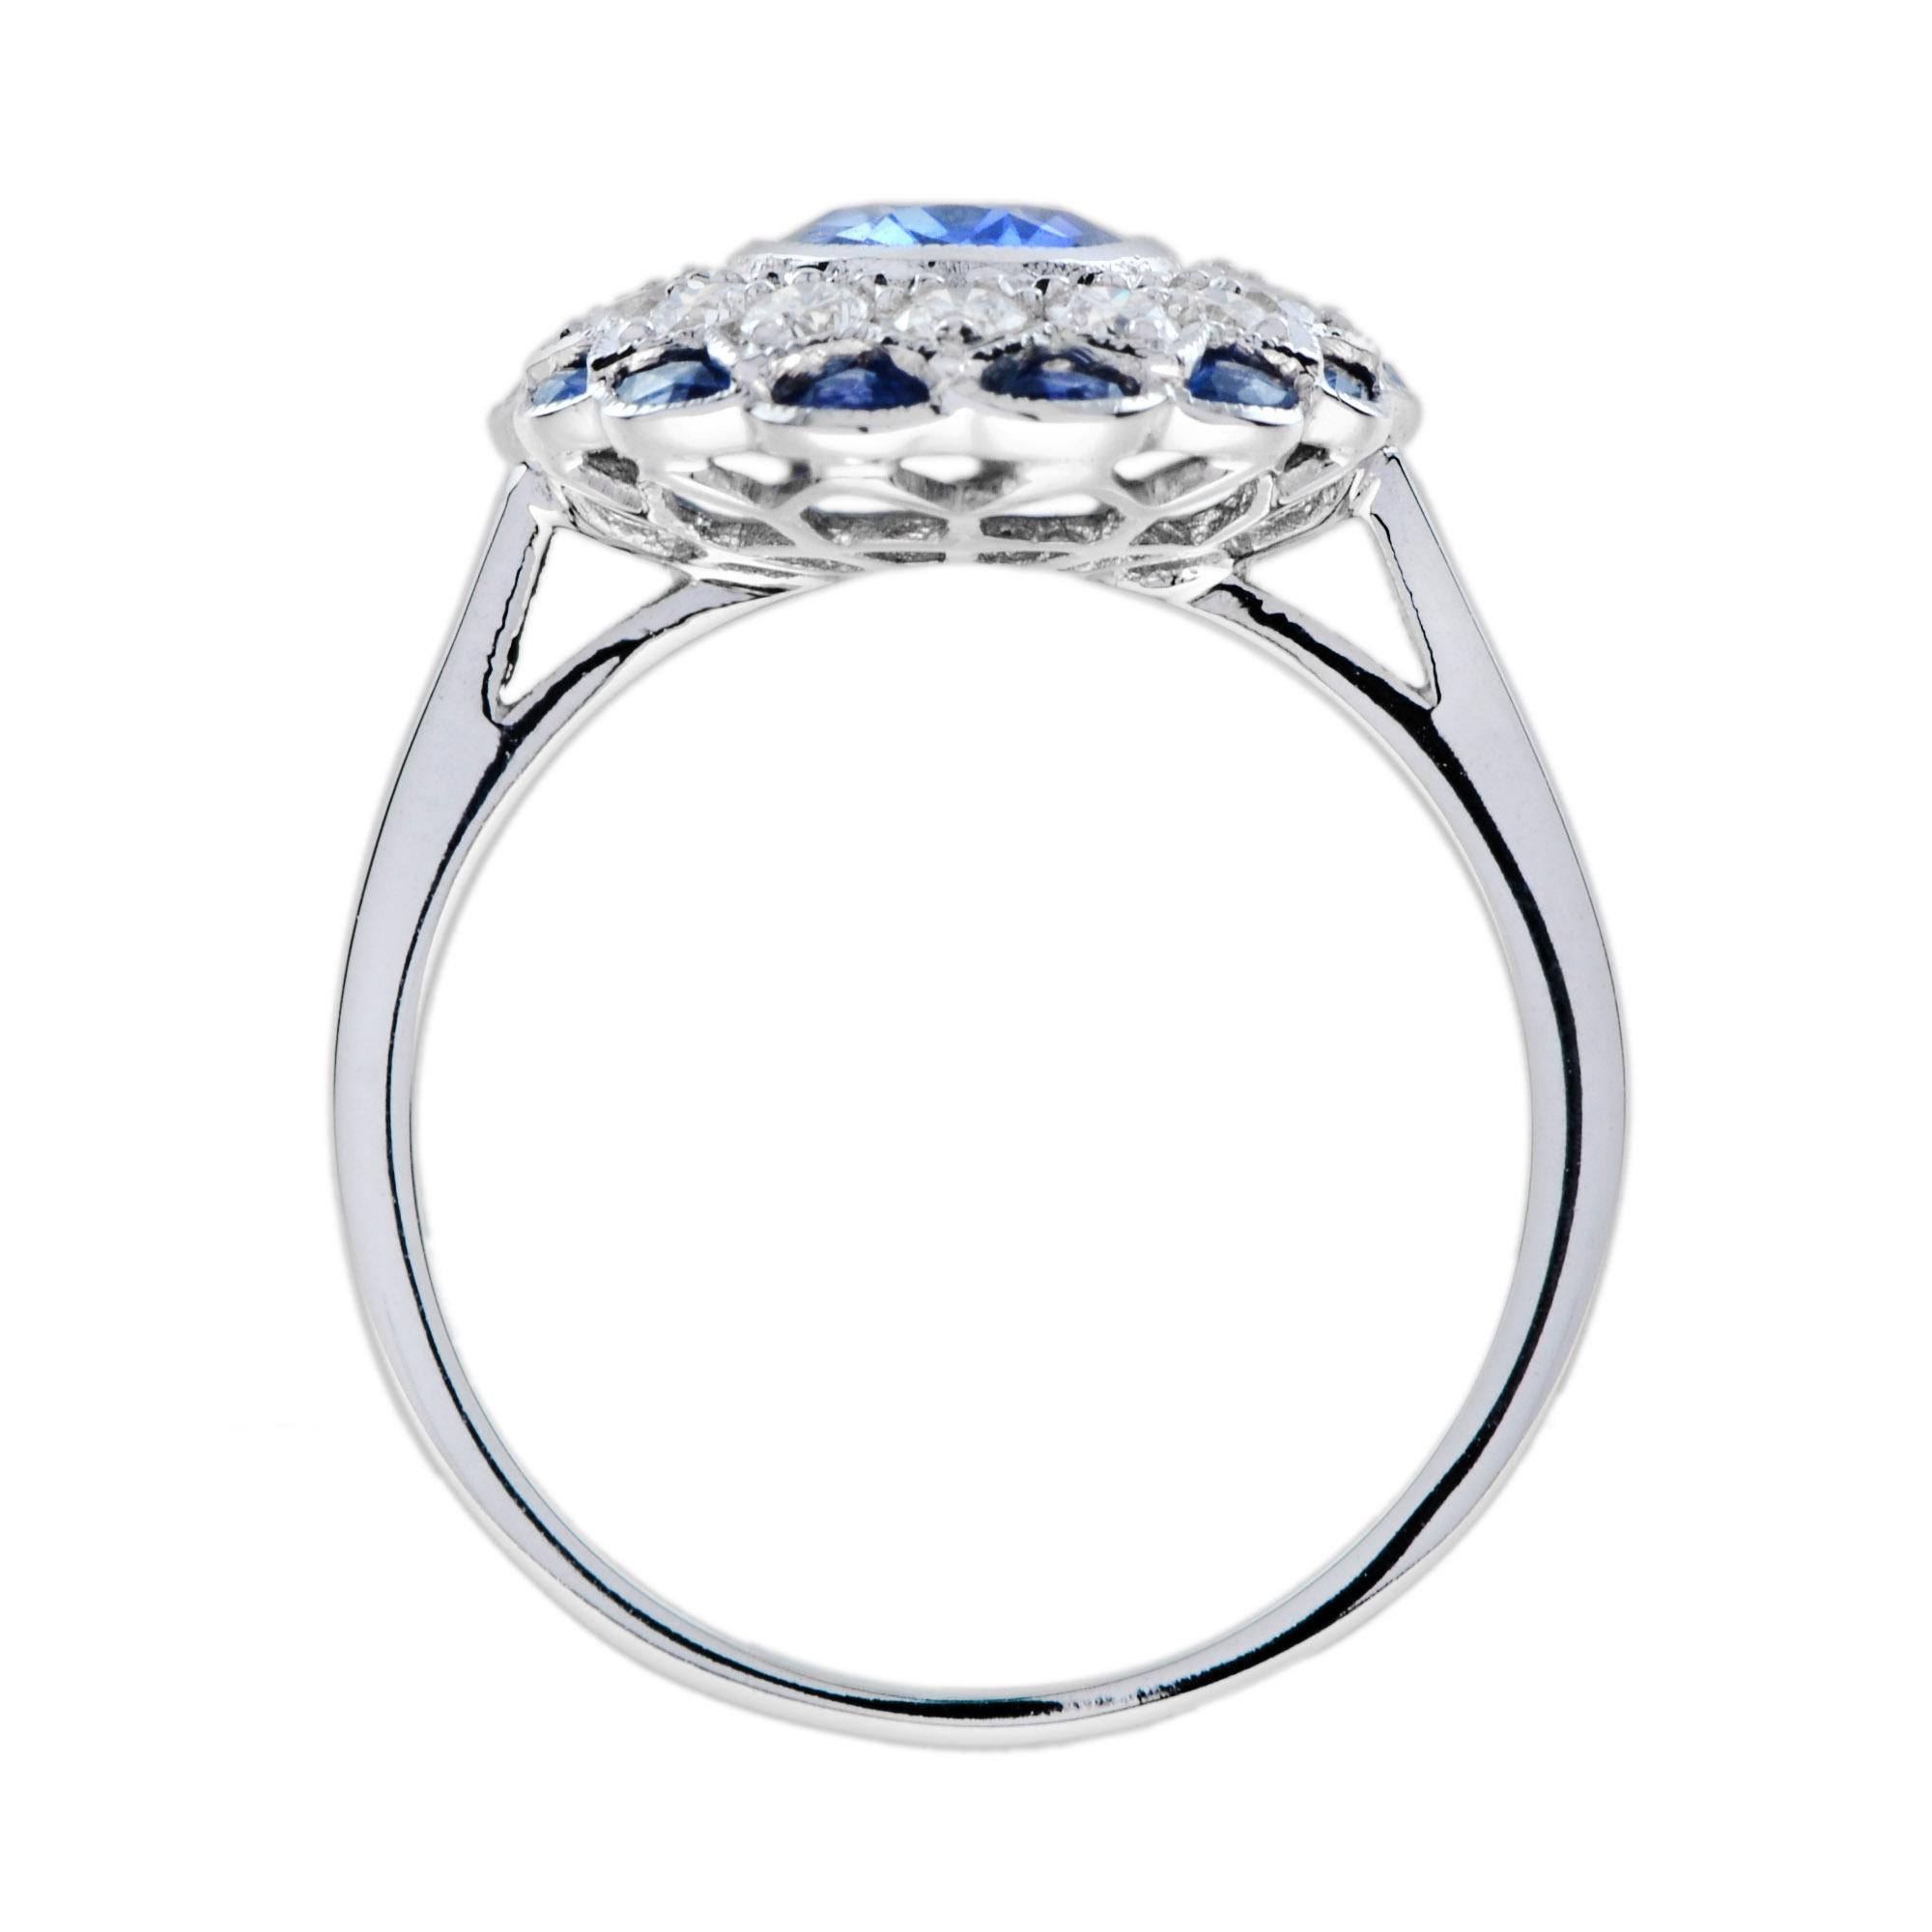 Oval Cut Ceylon Sapphire and Diamond Art Deco Style Halo Ring in 18K White Gold For Sale 2